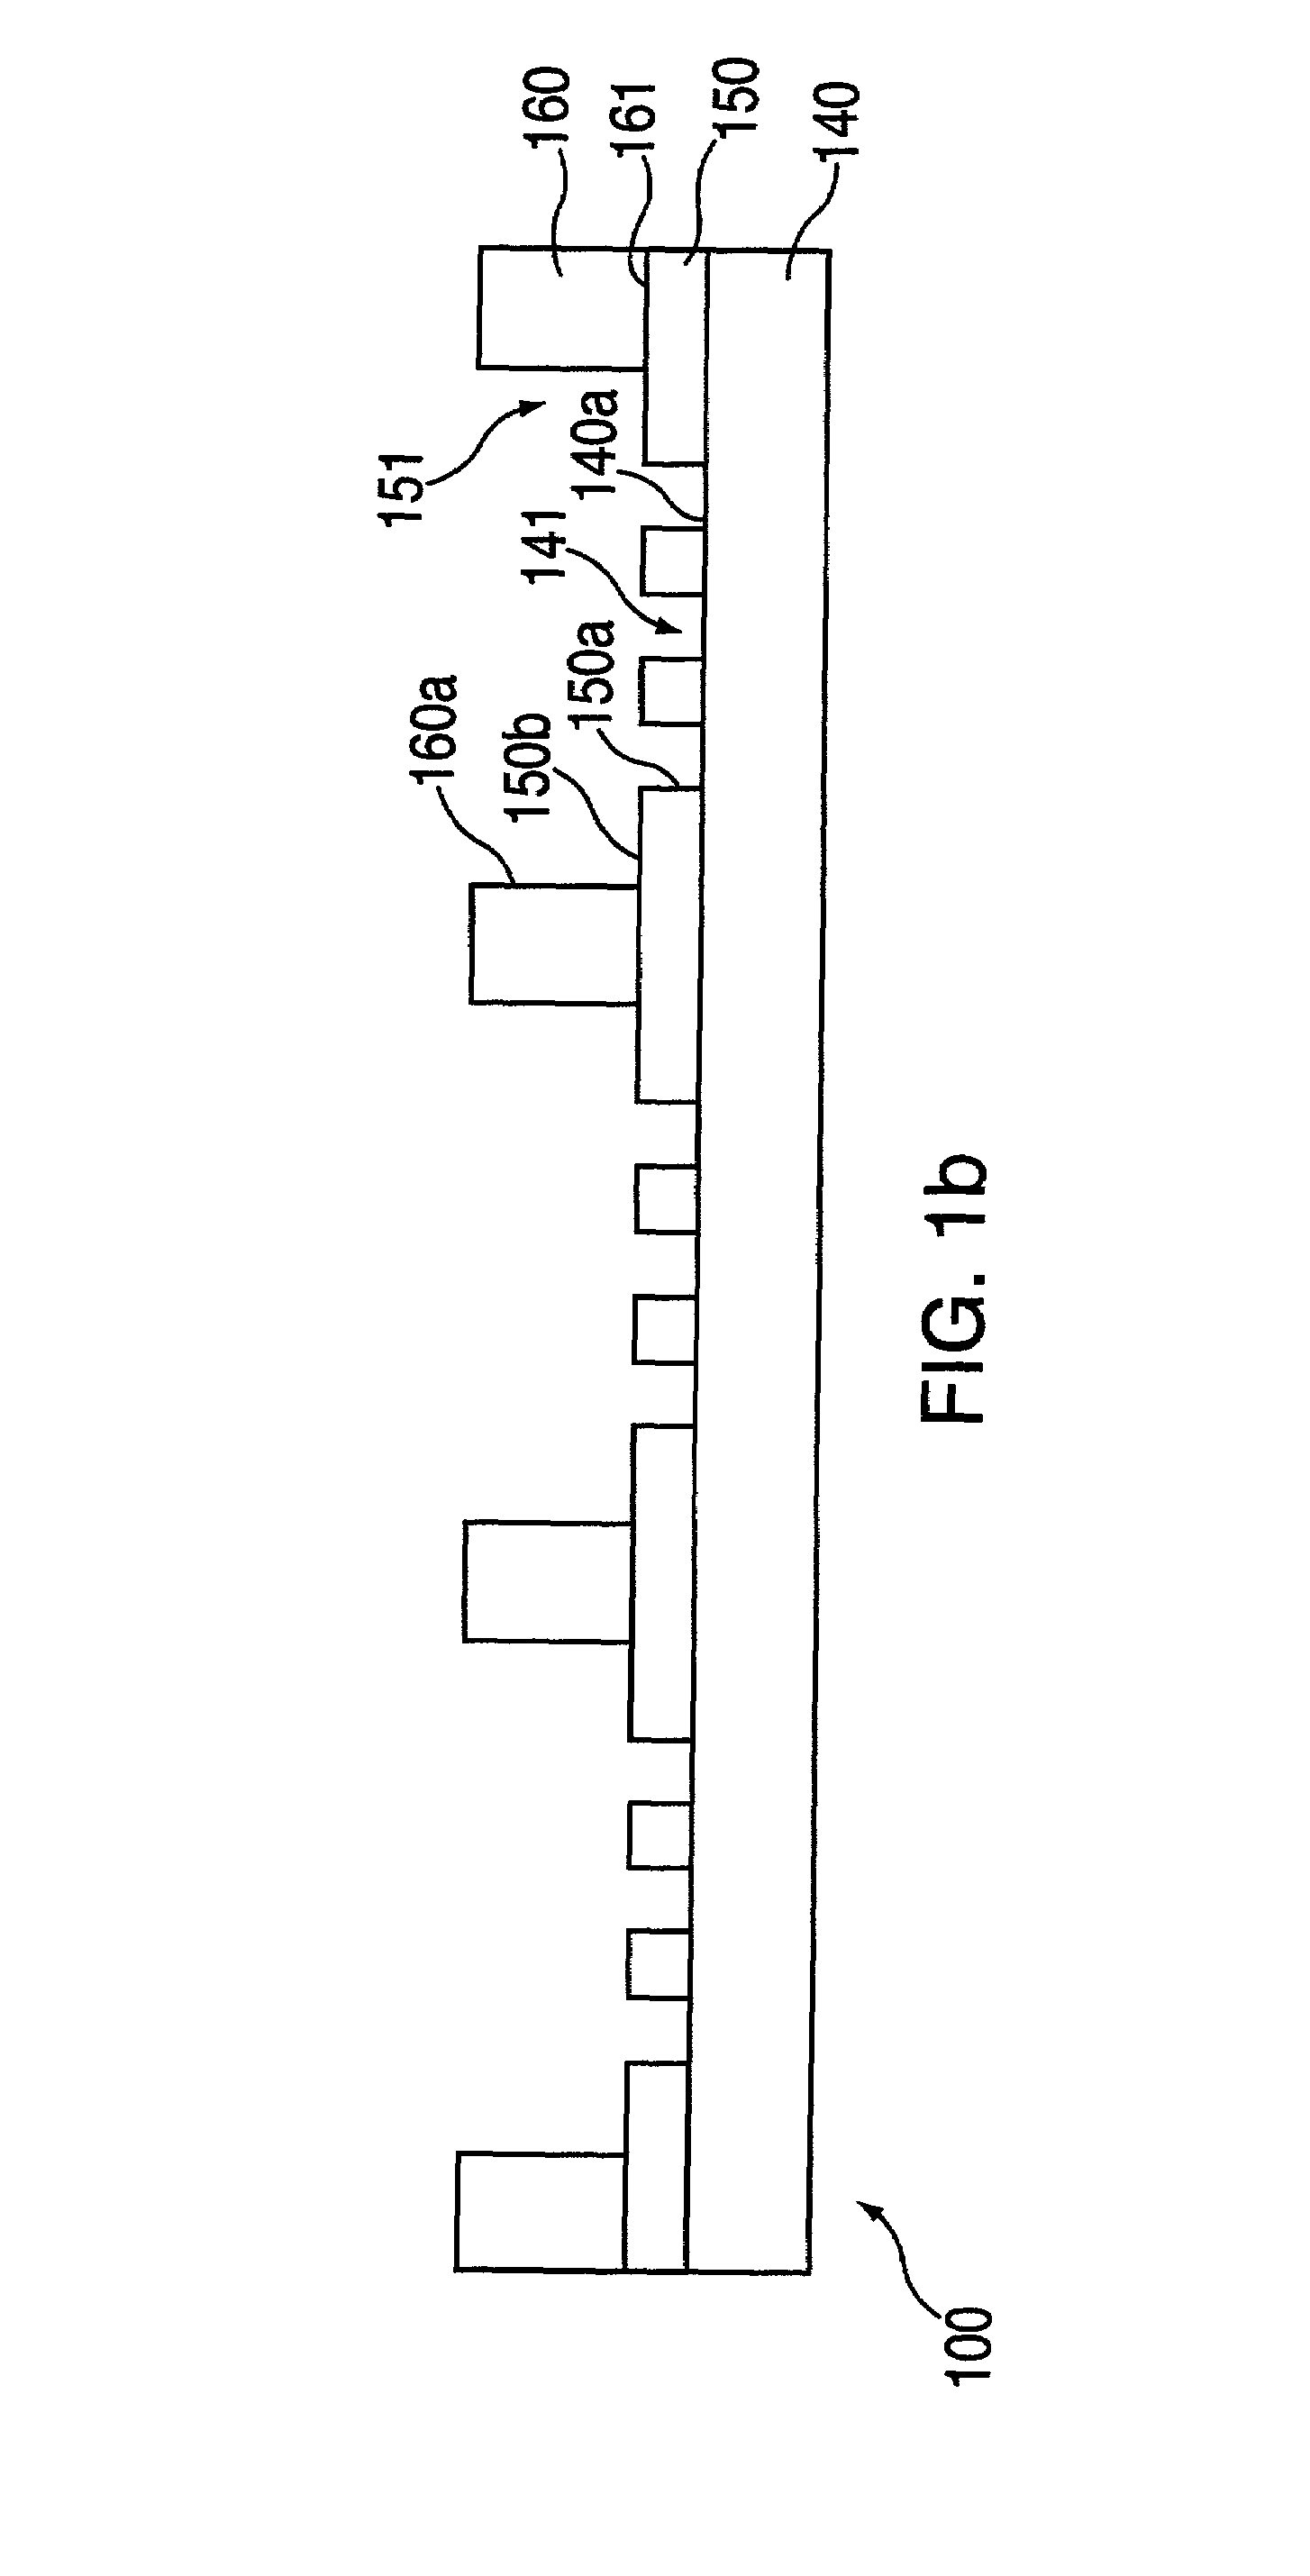 Method of making device for arraying biomolecules and for monitoring cell motility in real-time